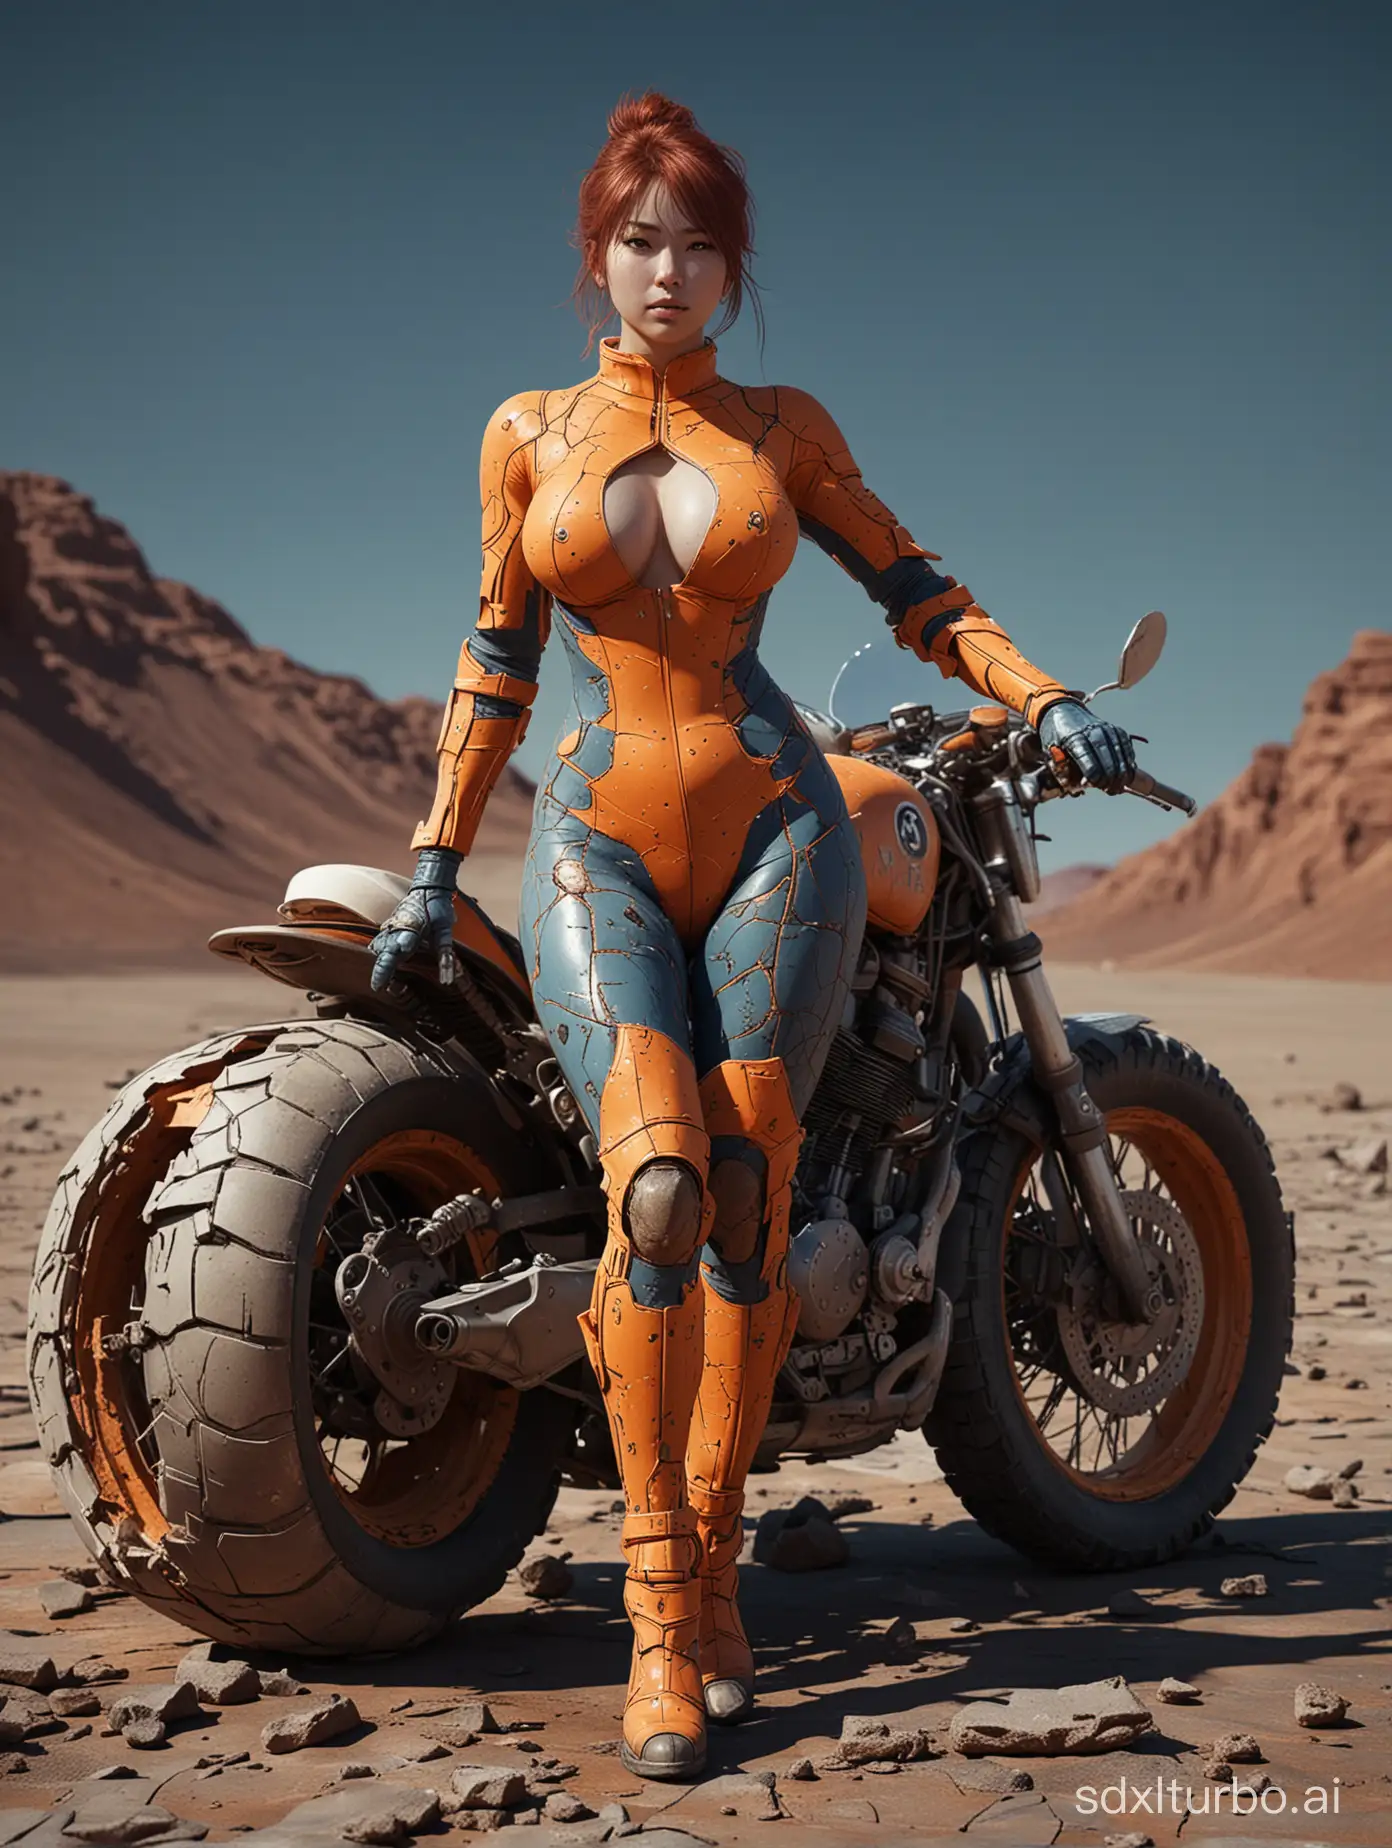 Fukada Kyoko，motorcycle on the mars，((full body, huge round ass)), Sailor dress, huge breast, a photo of a woman on a cracked surface, inspired by Alberto Seveso, featured on zbrush central, orange fire/blue ice duality!, portrait of an android, fractal human silhouette, red realistic 3 d render, blue and orange, subject made of cracked clay, woman, made of lava